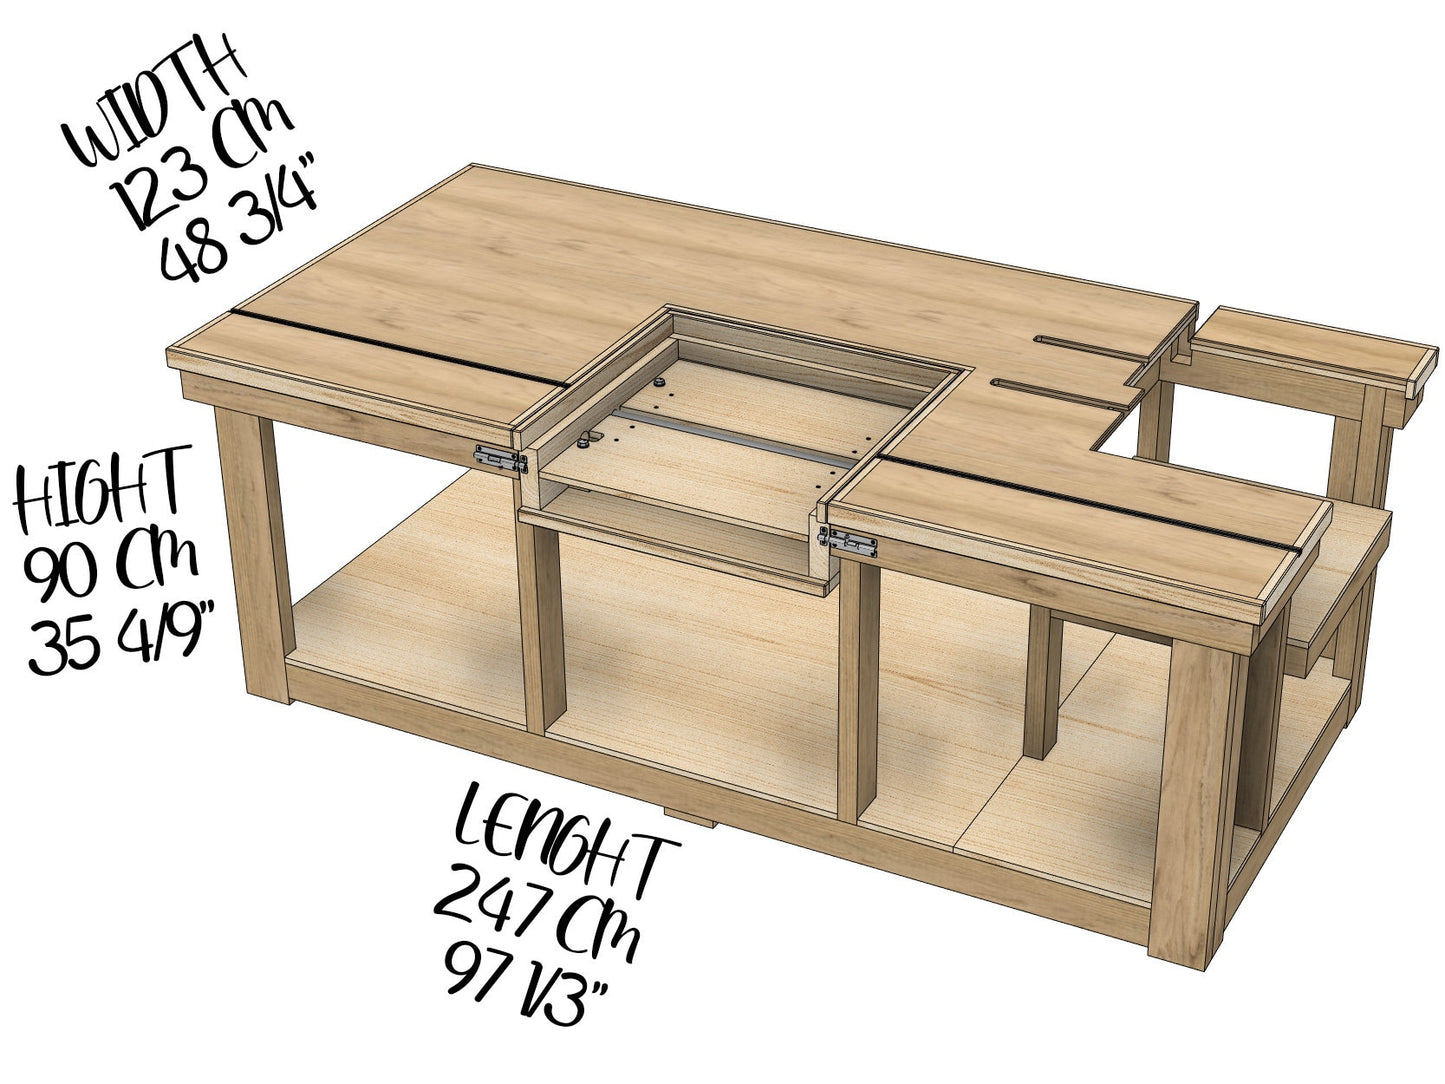 Miter Saw Flip-Top Workbench with a Table Saw | Plans in Imperial and Metric